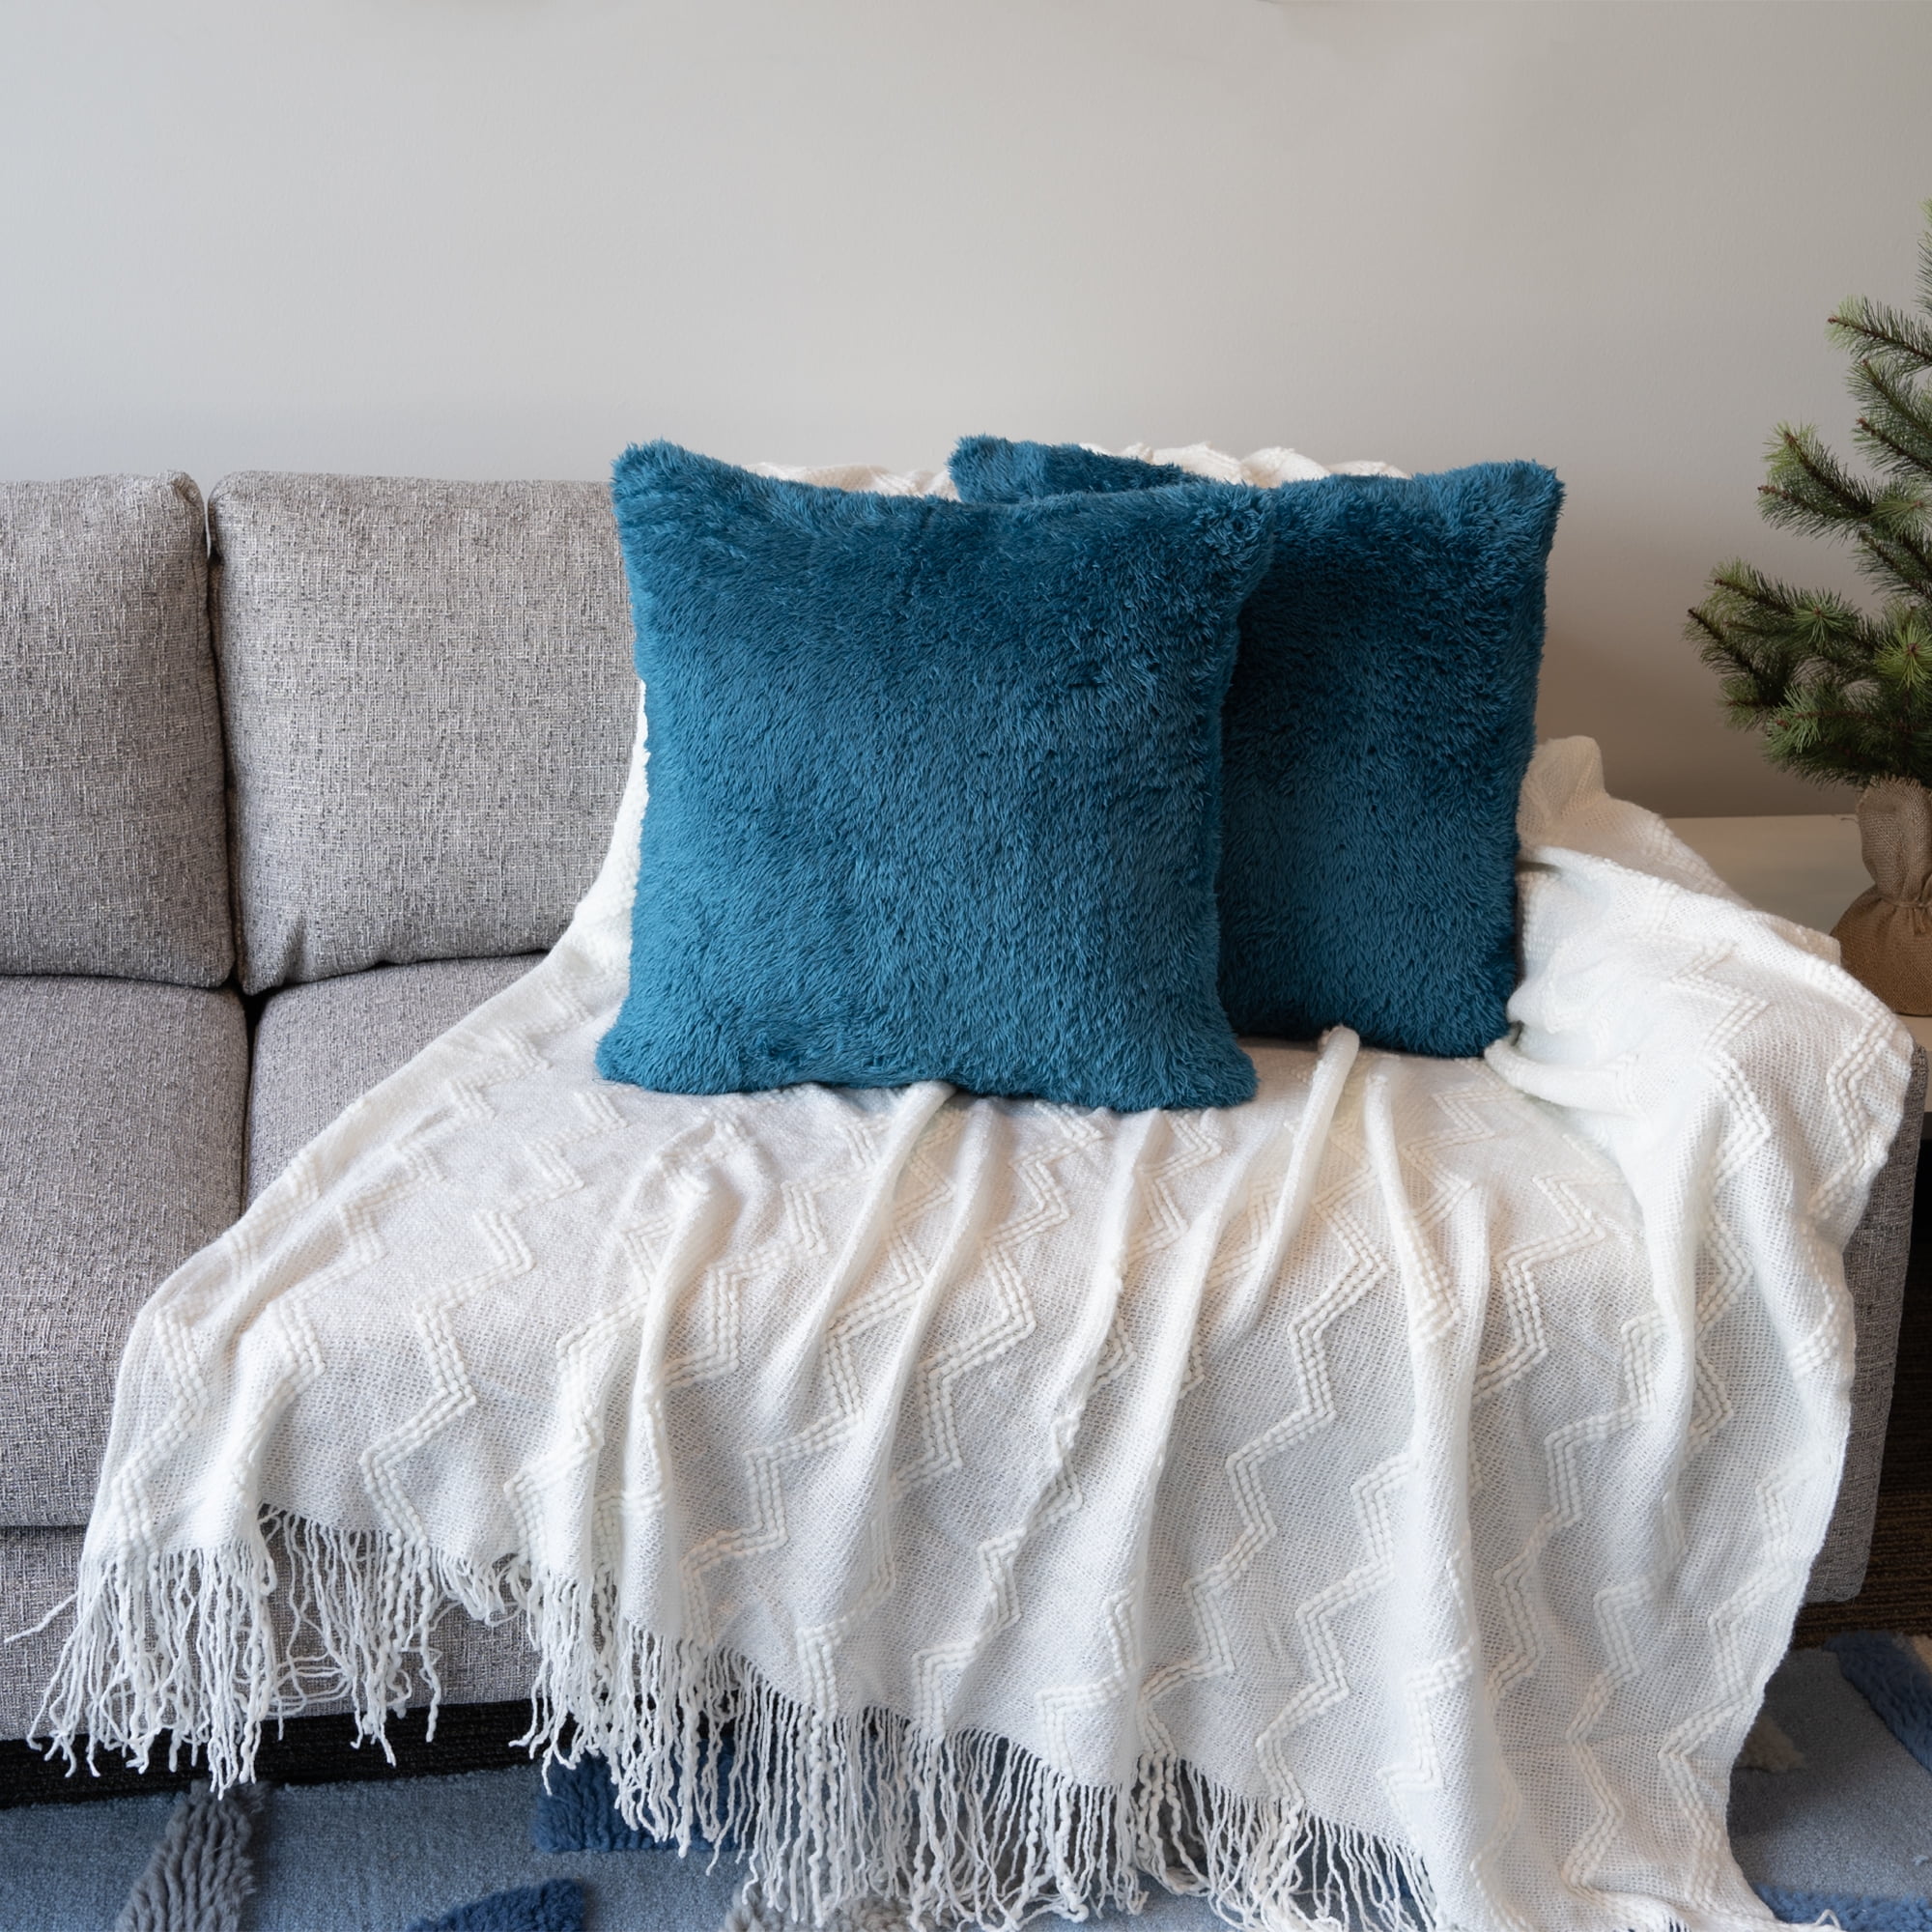 PAVILIA Fluffy Teal Blue Throw Pillow Covers, Decorative Accent